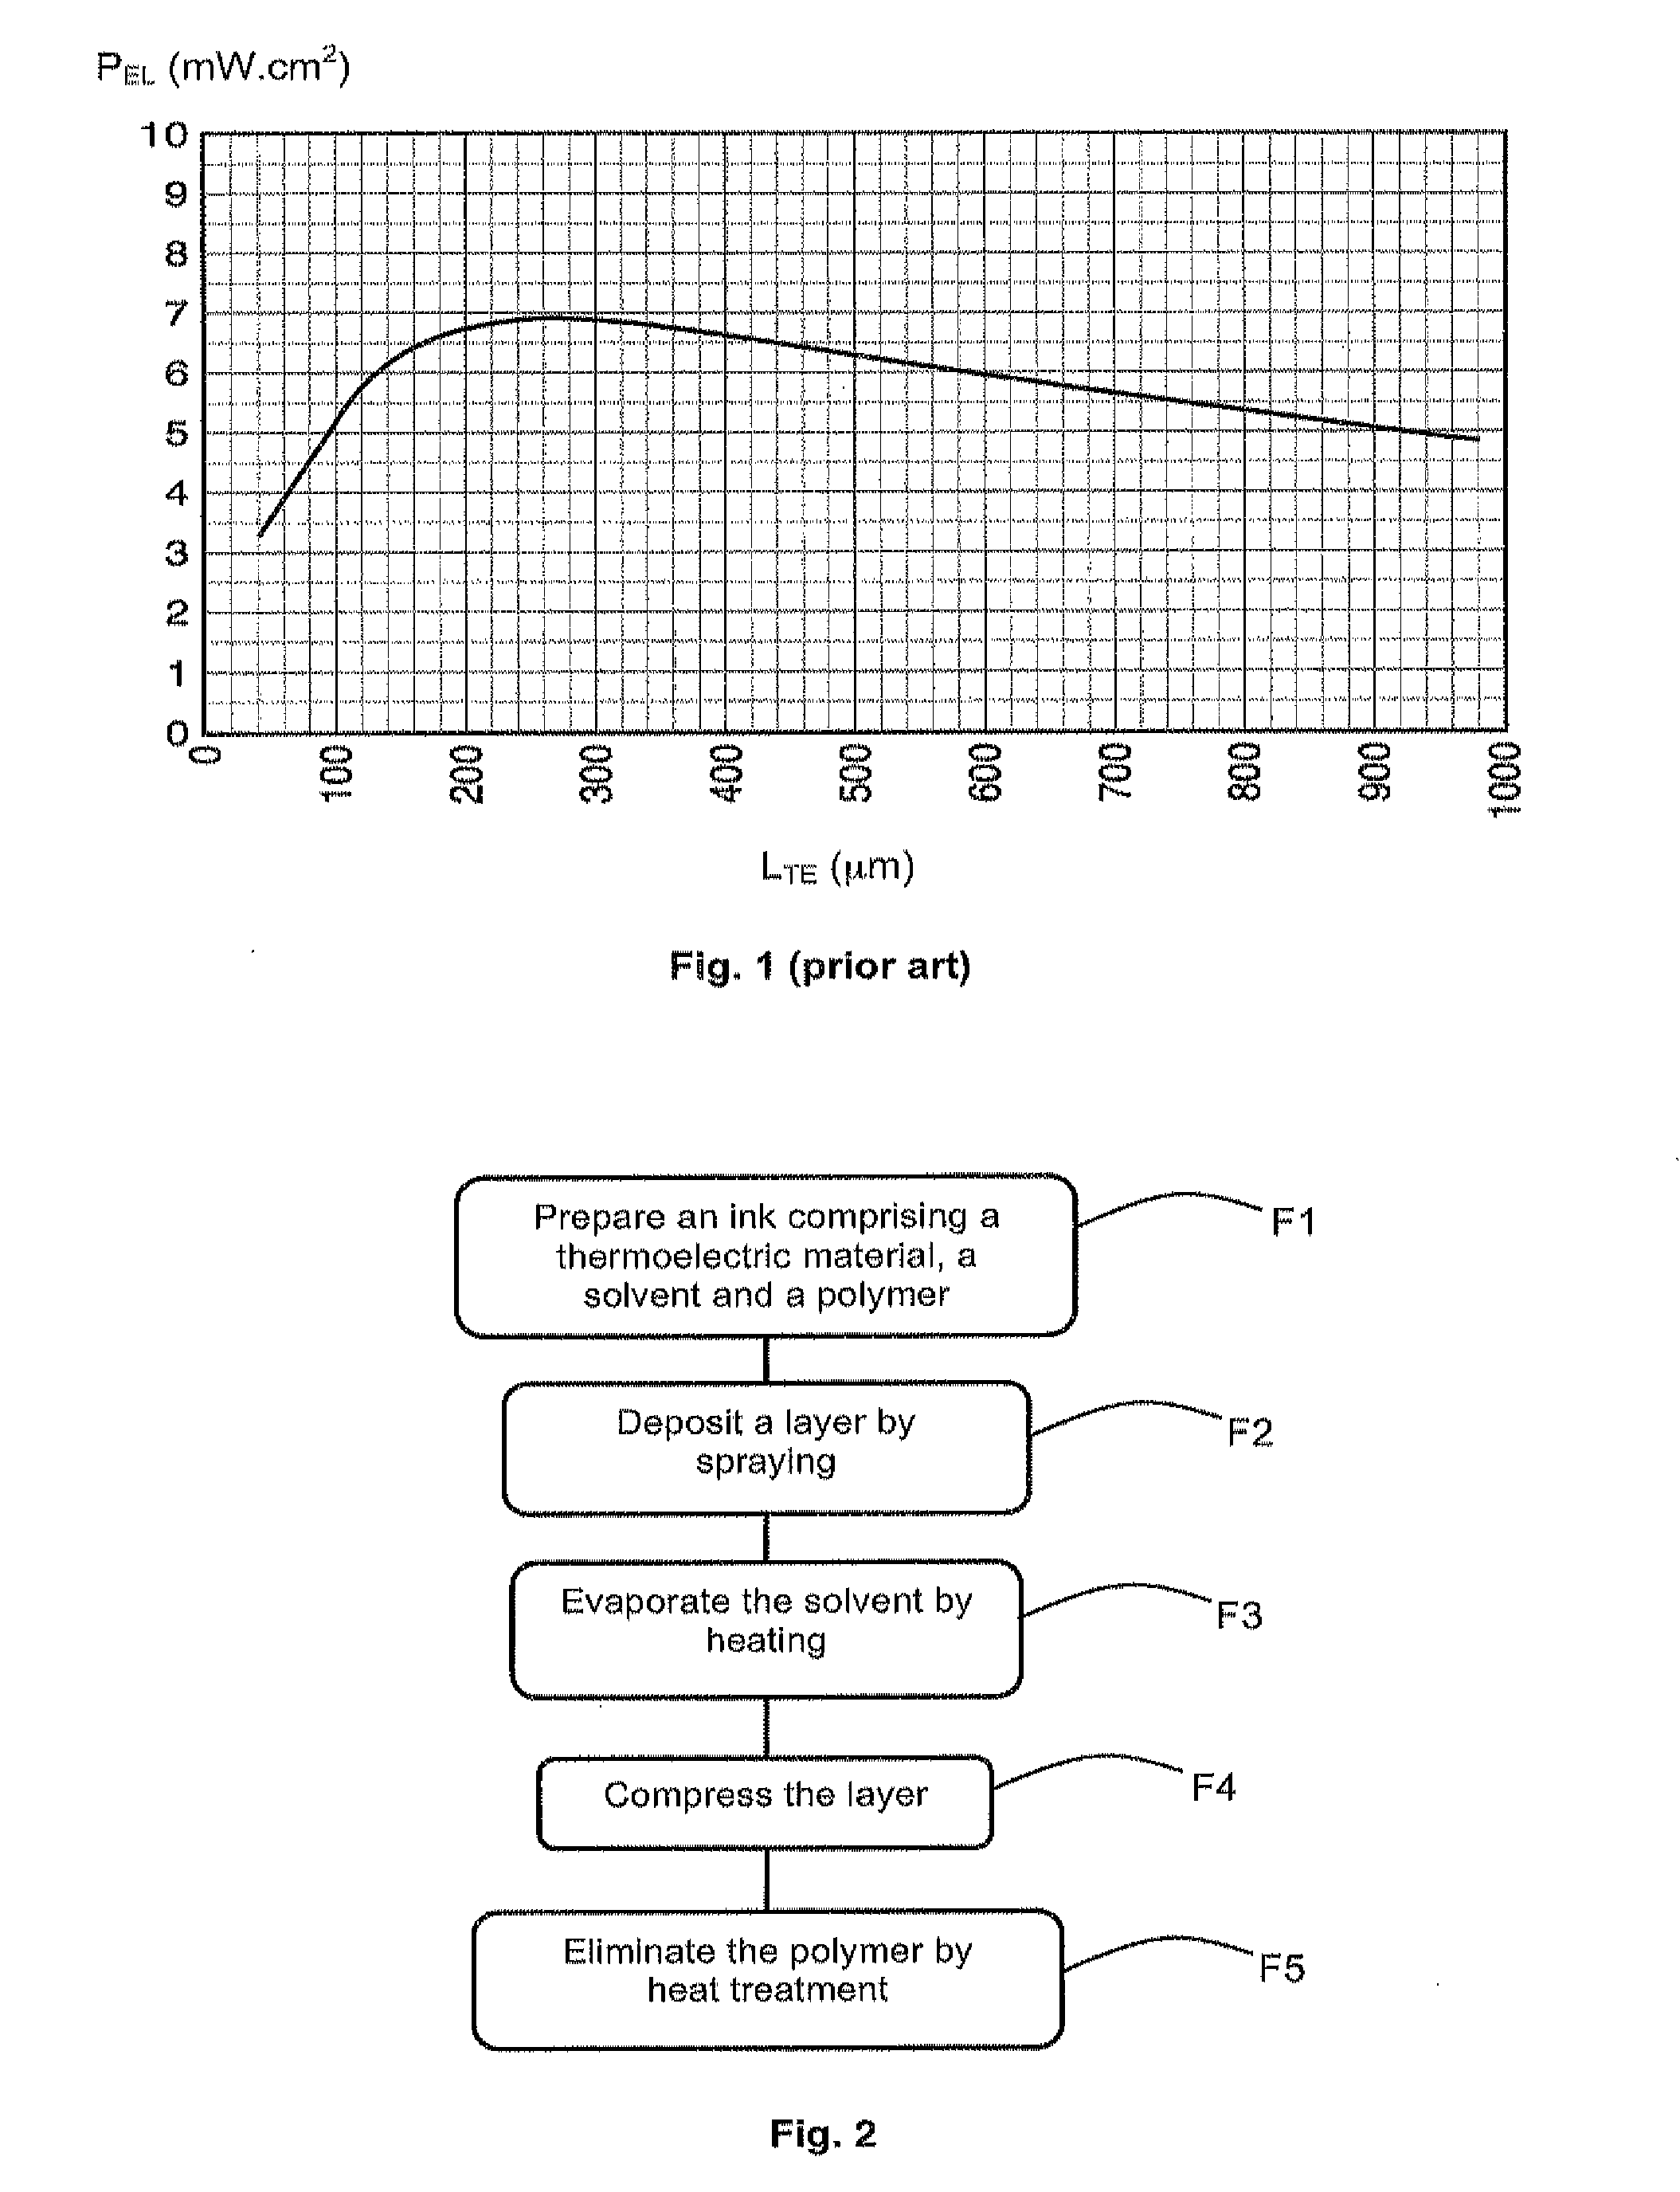 Deposition of thermoelectric materials by printing